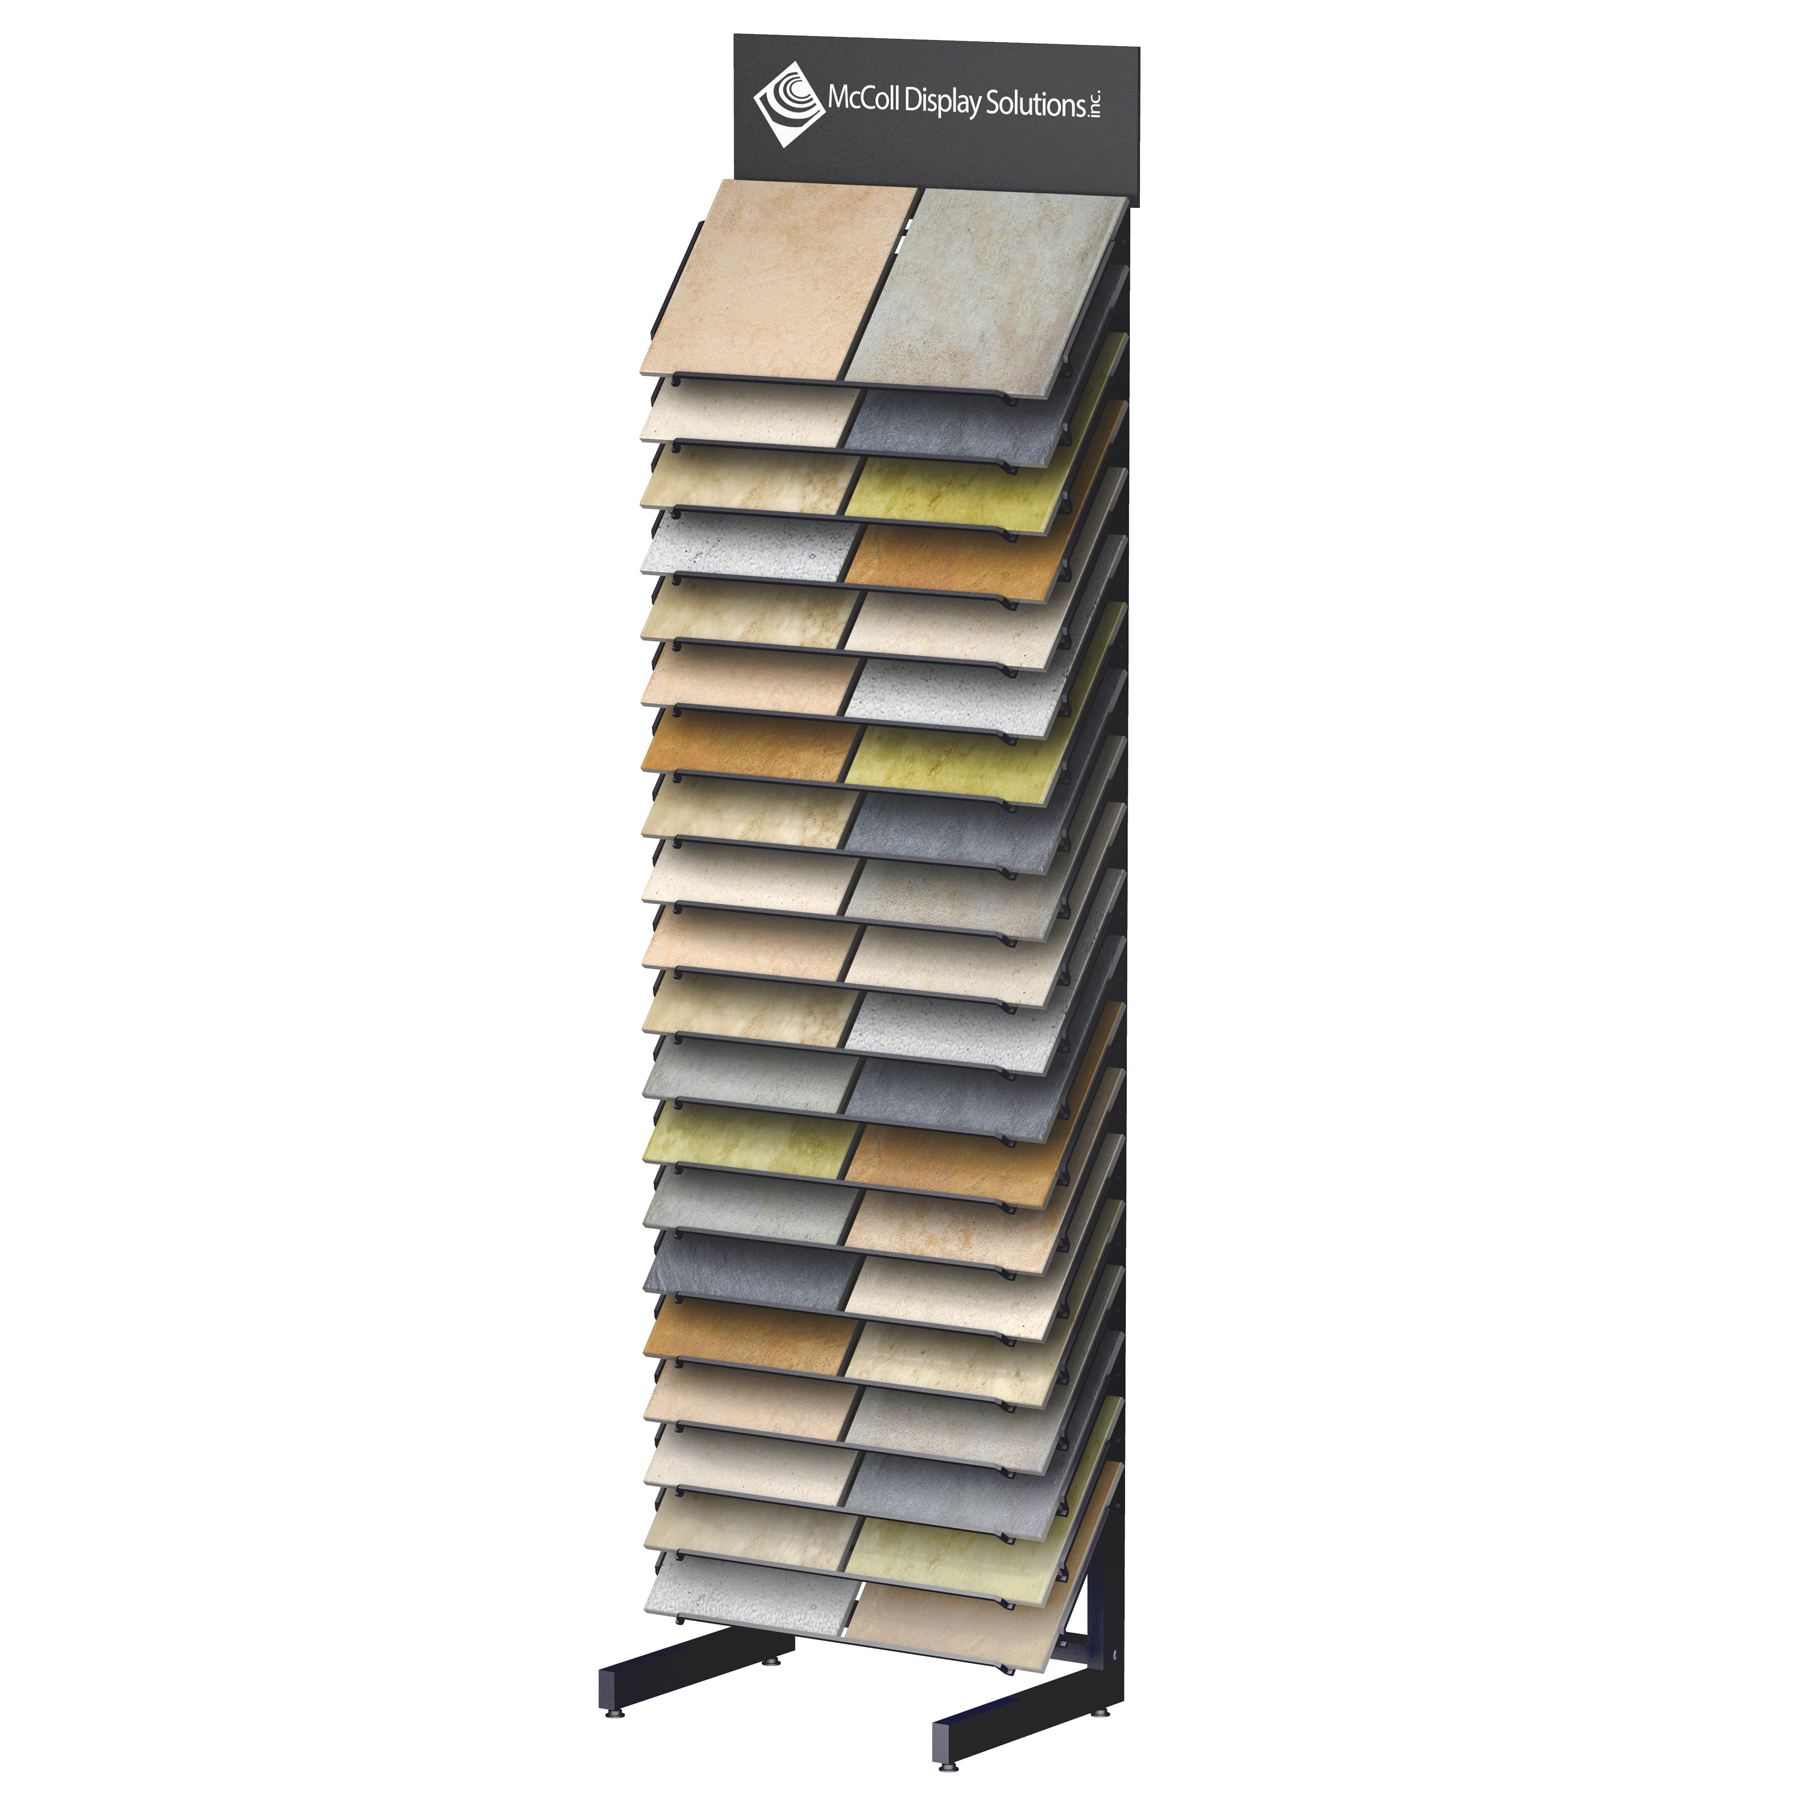 CD60 Tower Display for Flooring Showroom Powder Coated Steel Frame and Wire Shelves